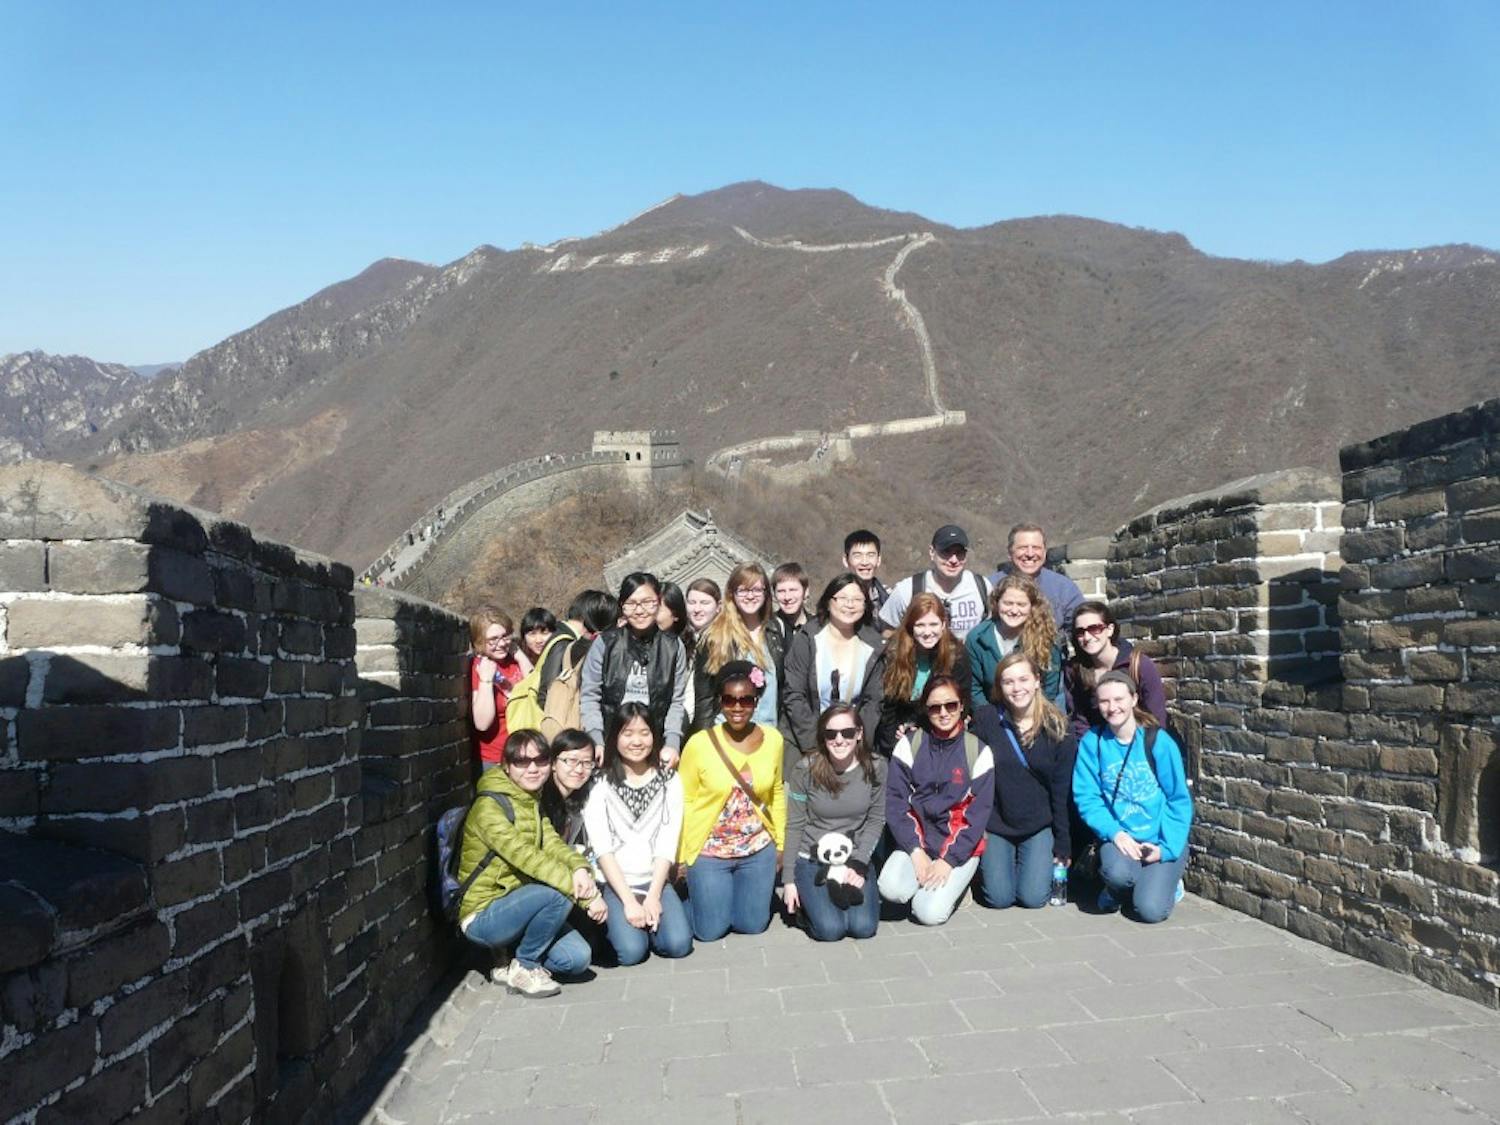 Adoration-Chorus-with-friends-on-the-Great-Wall-of-China-1.jpg